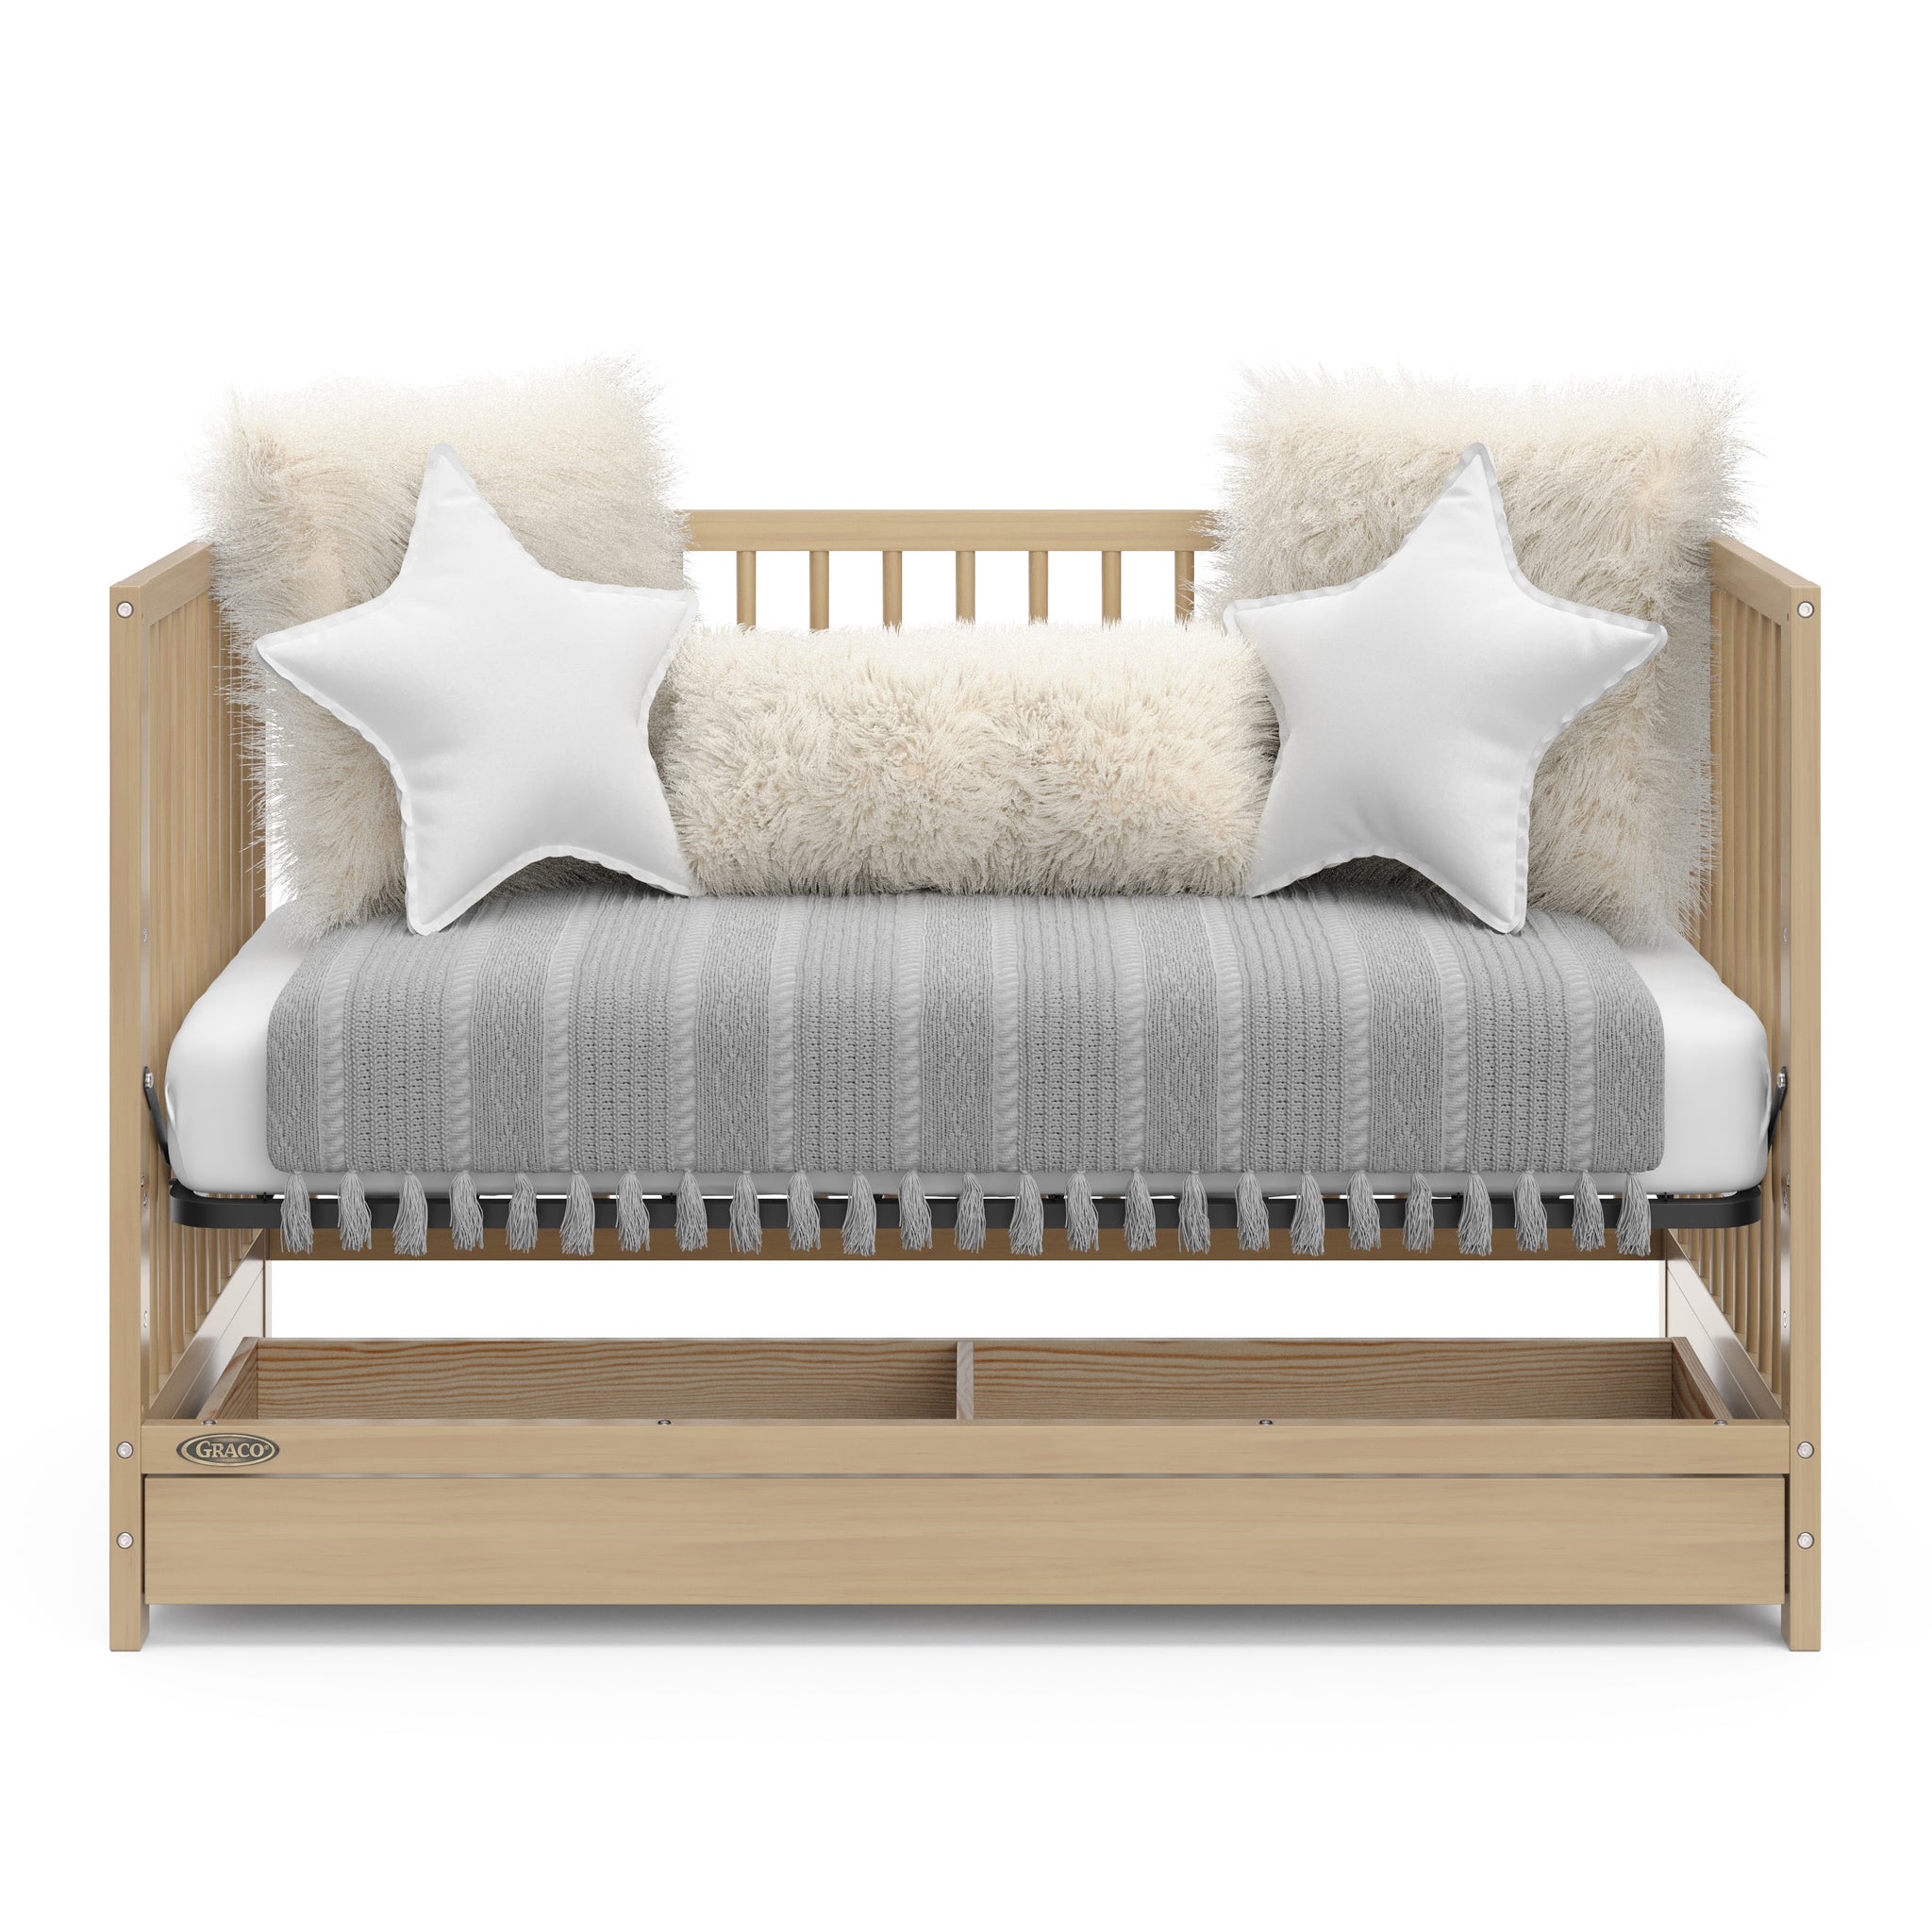 Driftwood crib with drawer in daybed conversion